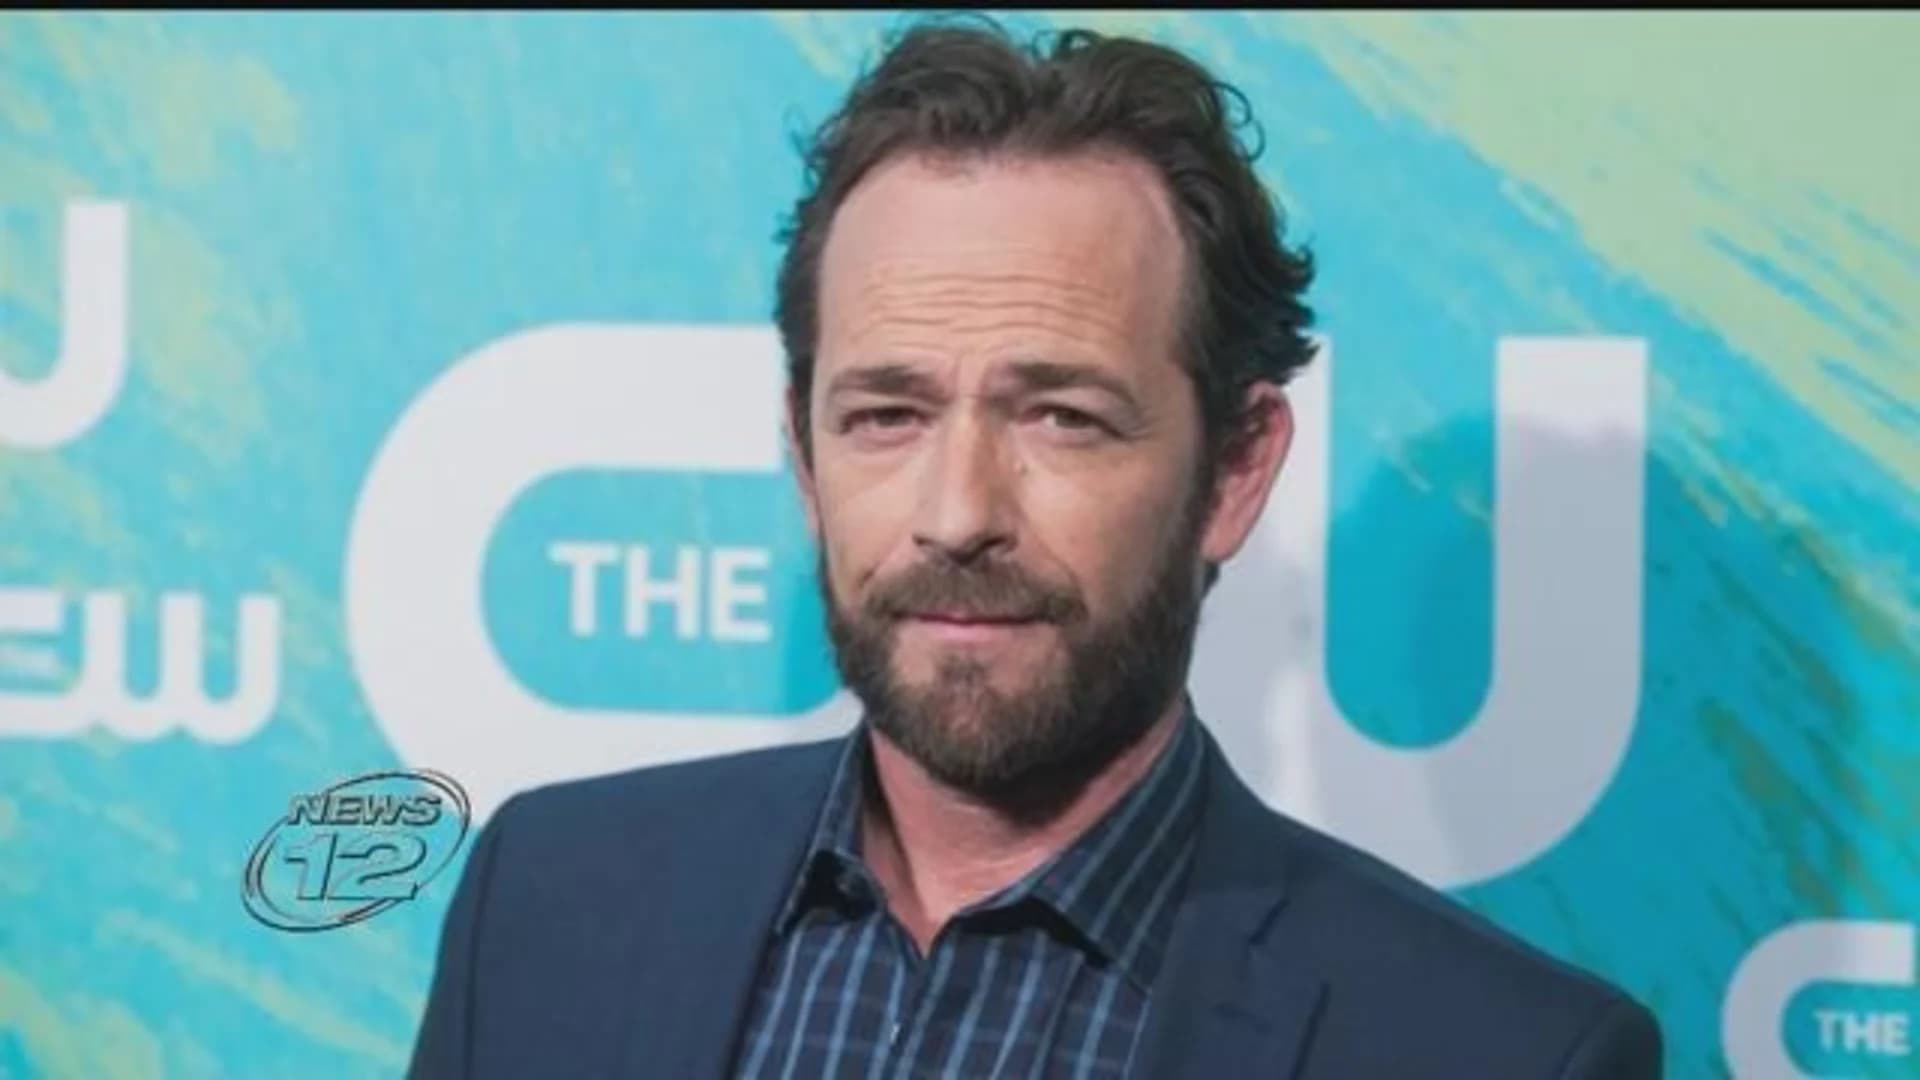 Luke Perry's death raises awareness about strokes, risk factors